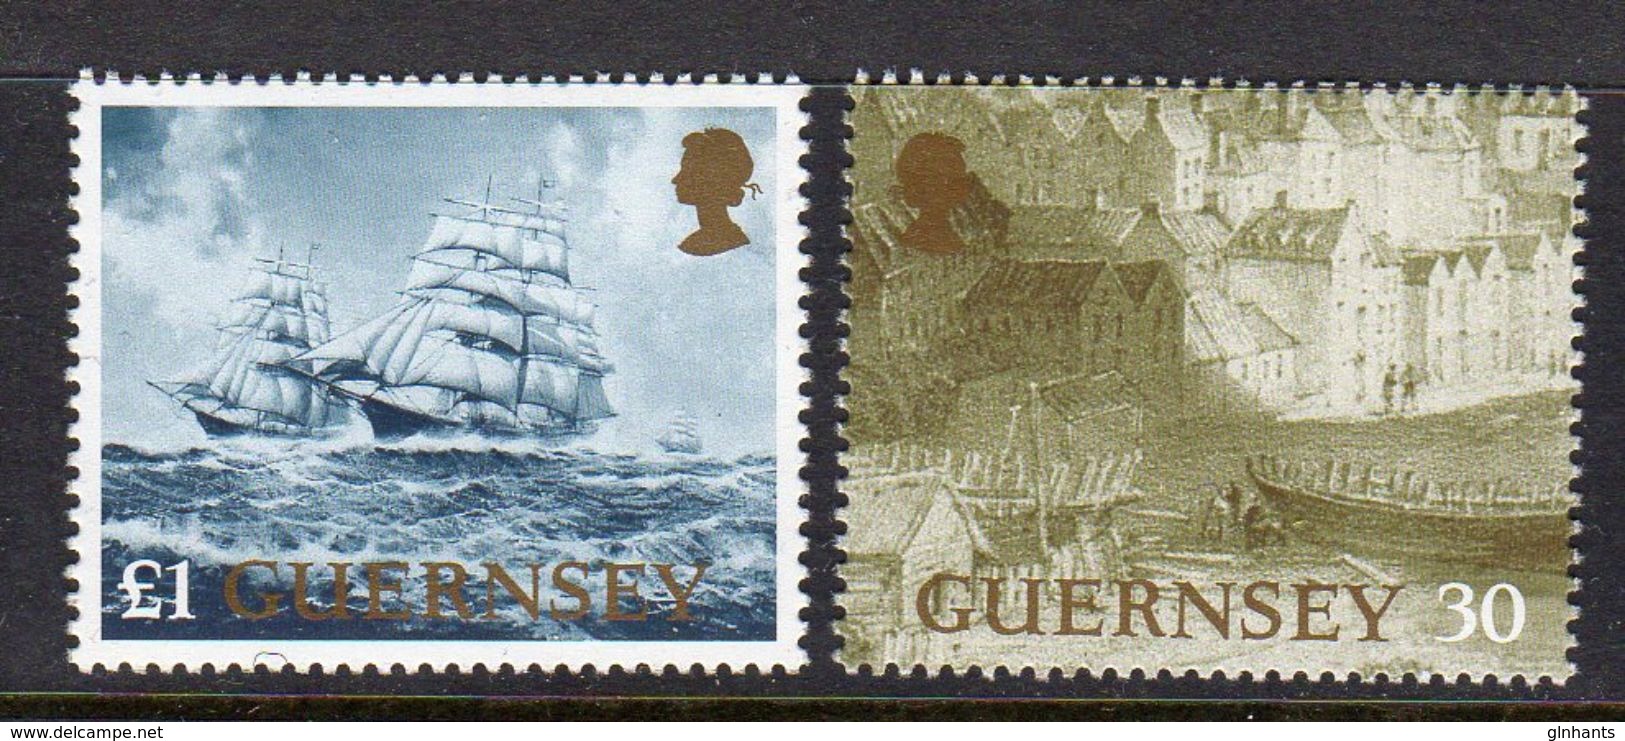 GUERNSEY GB - 1997 PACIFIC '97 BOATYARD STAMPS EX SG MS740 FINE MNH ** - Guernesey